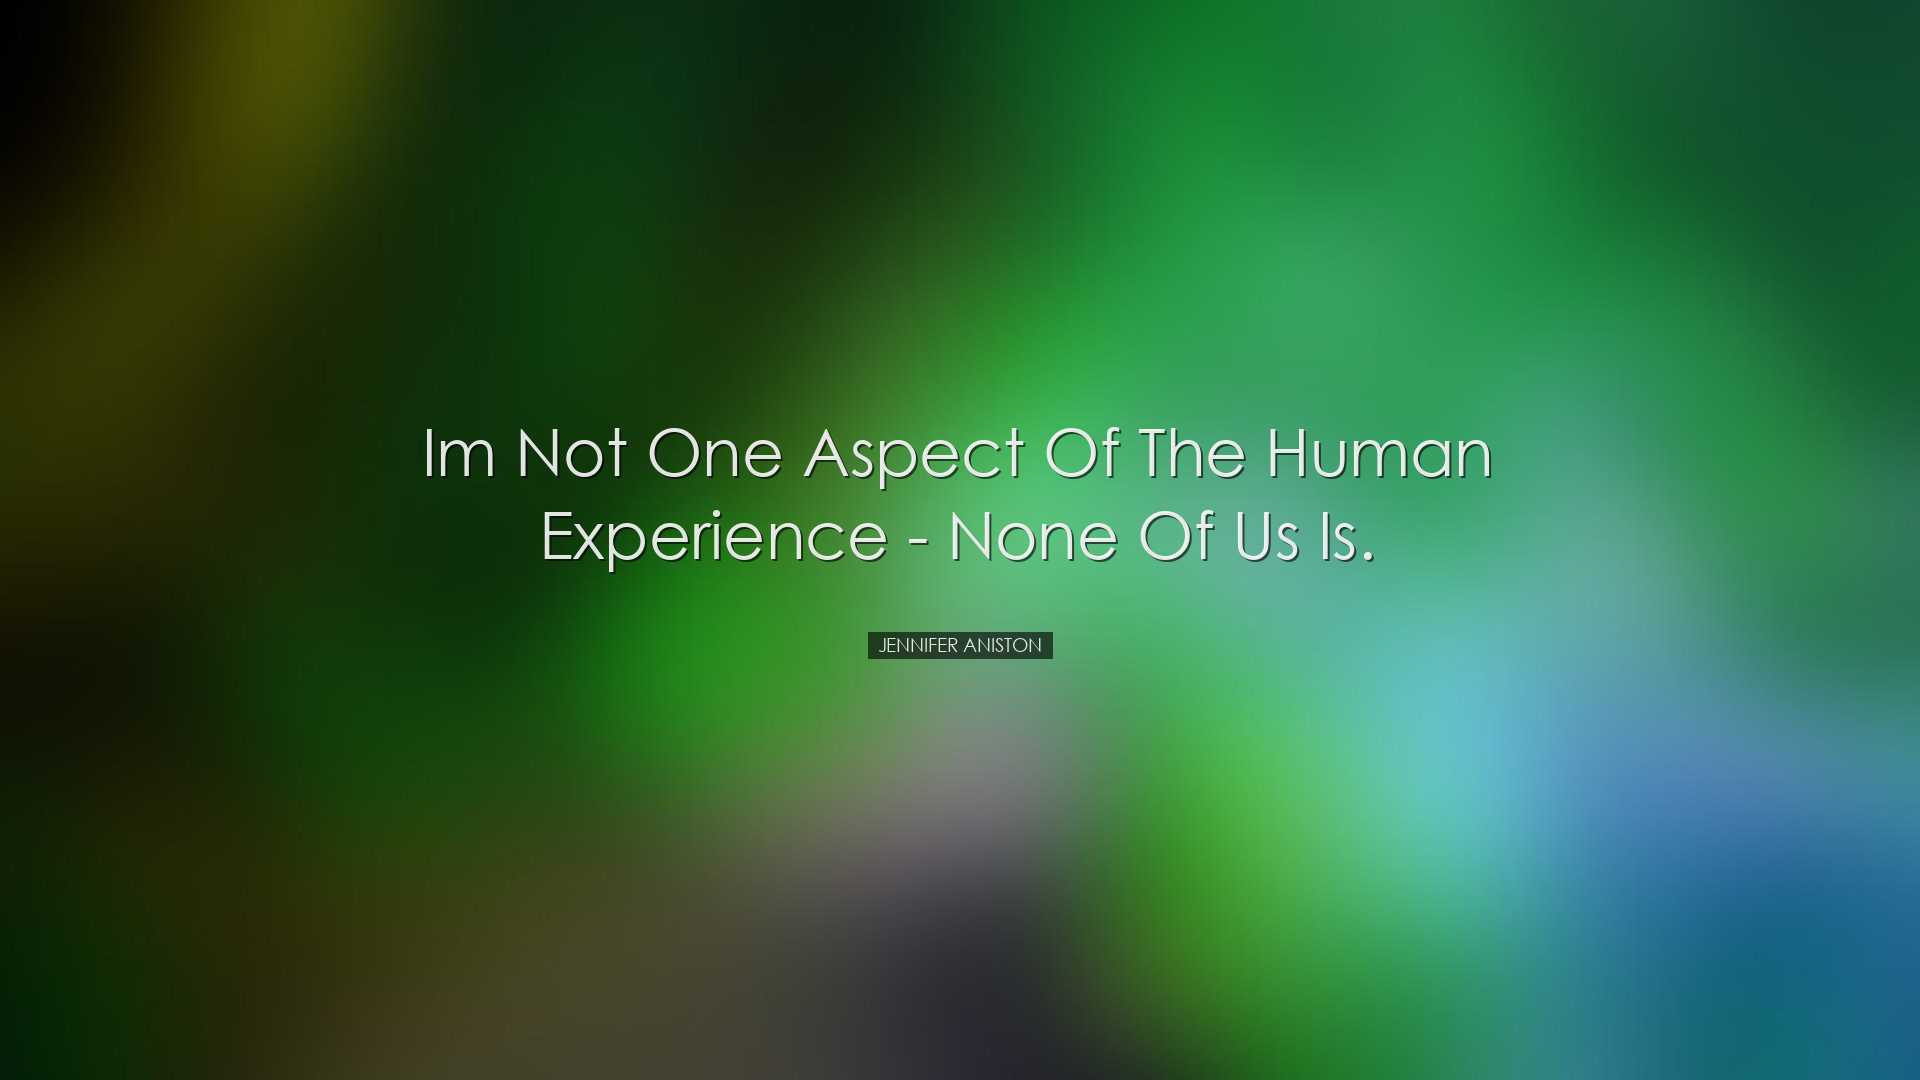 Im not one aspect of the human experience - none of us is. - Jenni